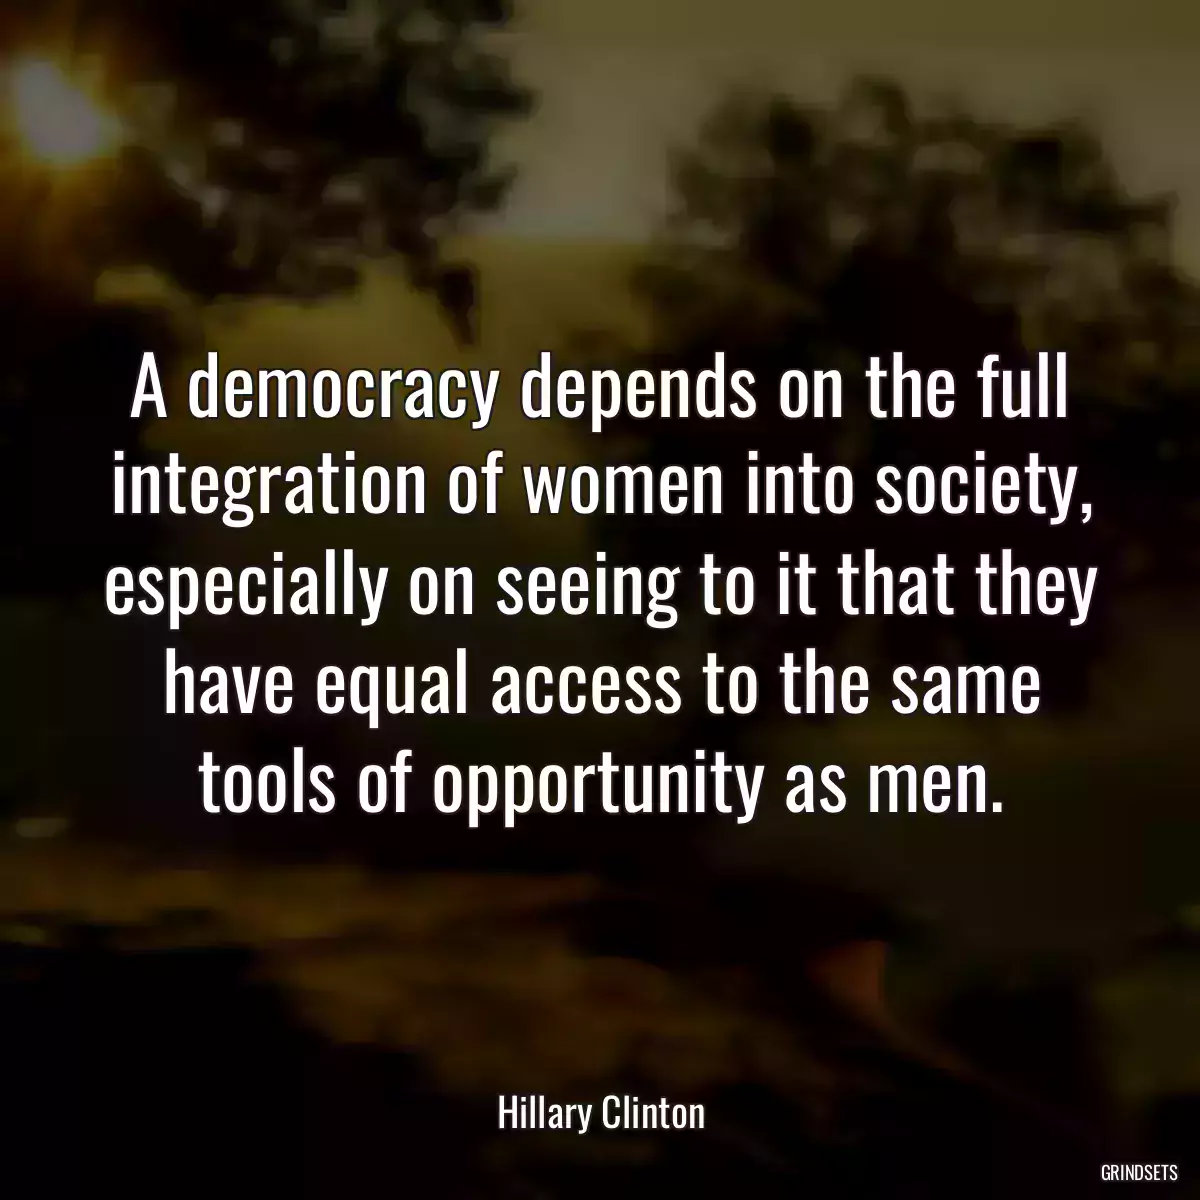 A democracy depends on the full integration of women into society, especially on seeing to it that they have equal access to the same tools of opportunity as men.